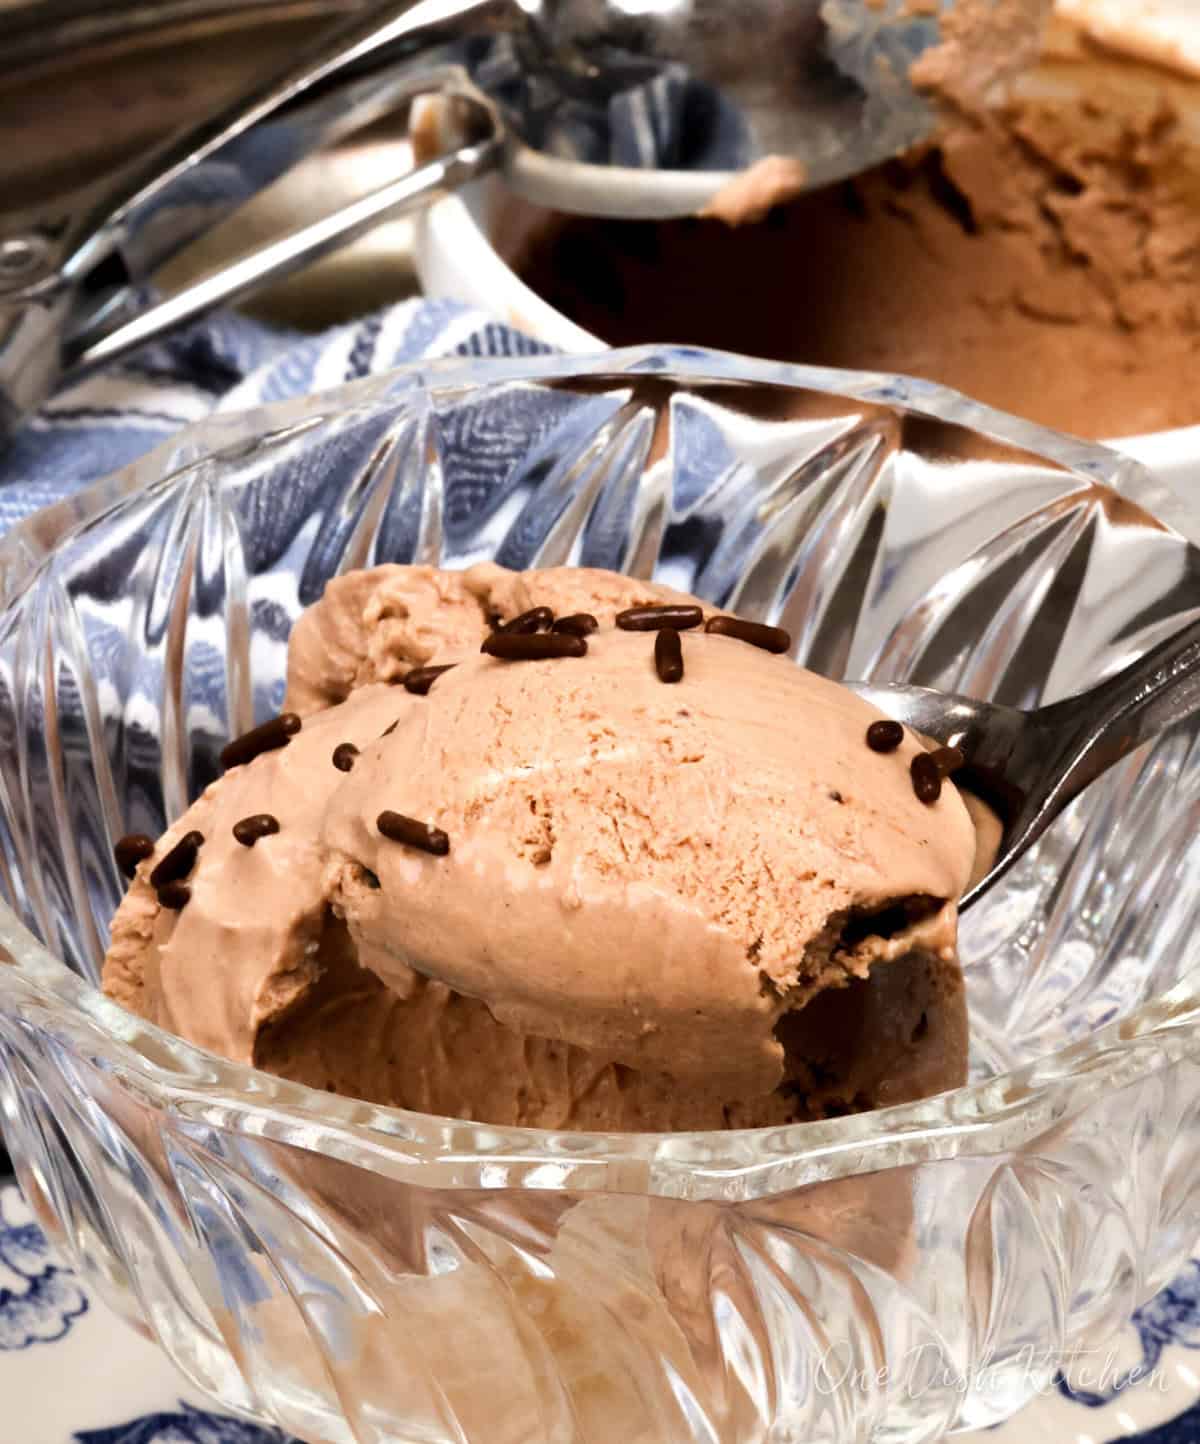 a bowl of chocolate ice cream with a spoon on the side.